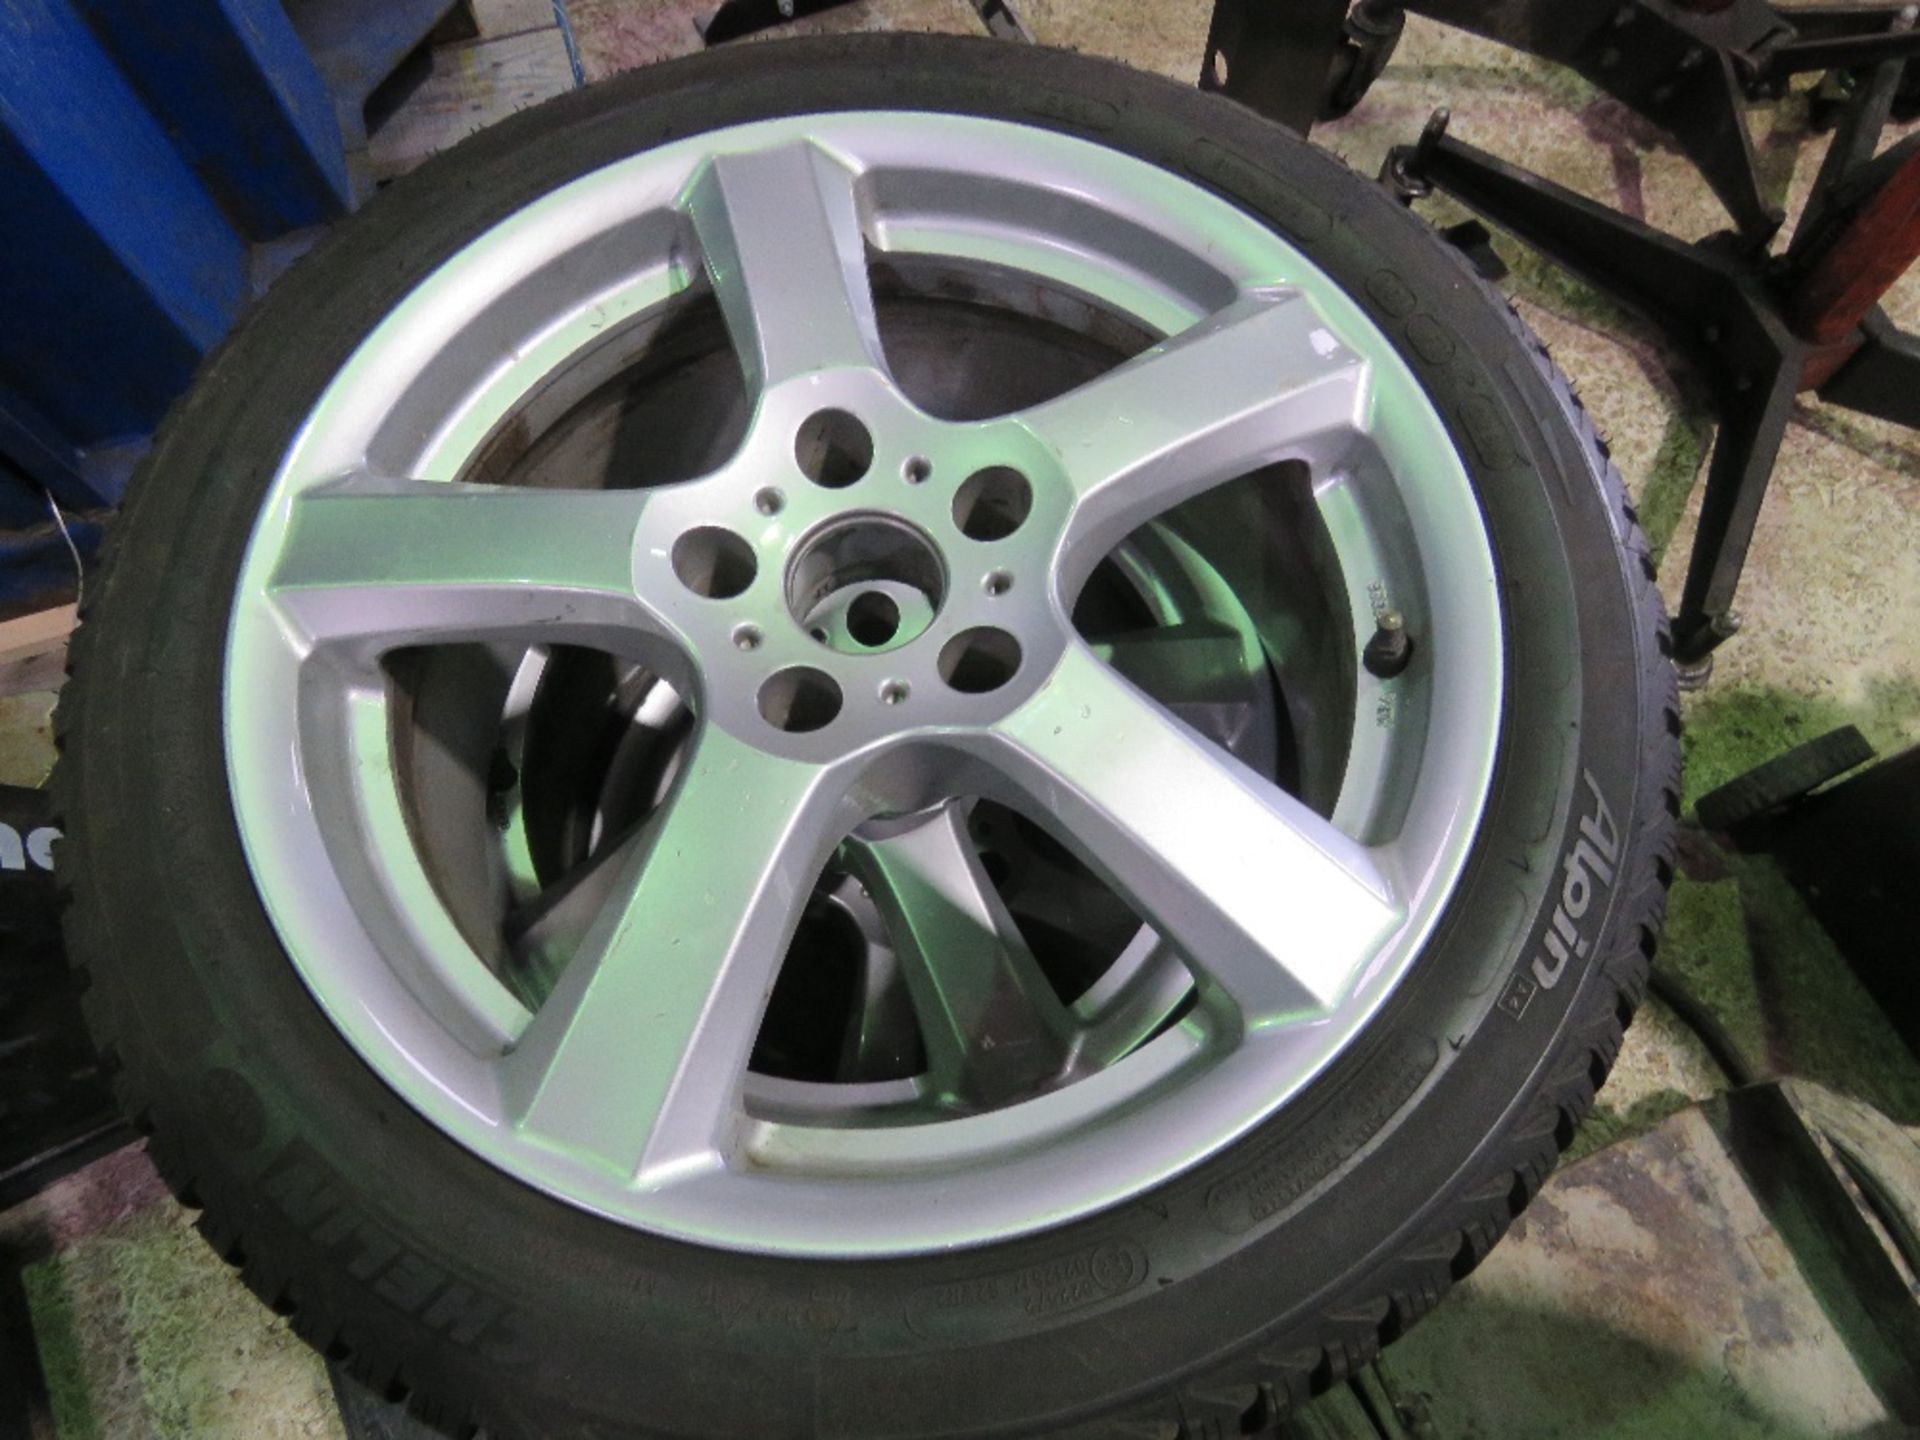 SET OF 4NO ENZO 225-45/17 ALLOY WHEELS AND TYRES, SNOW / WINTER TYRES FITTED. - Image 7 of 9